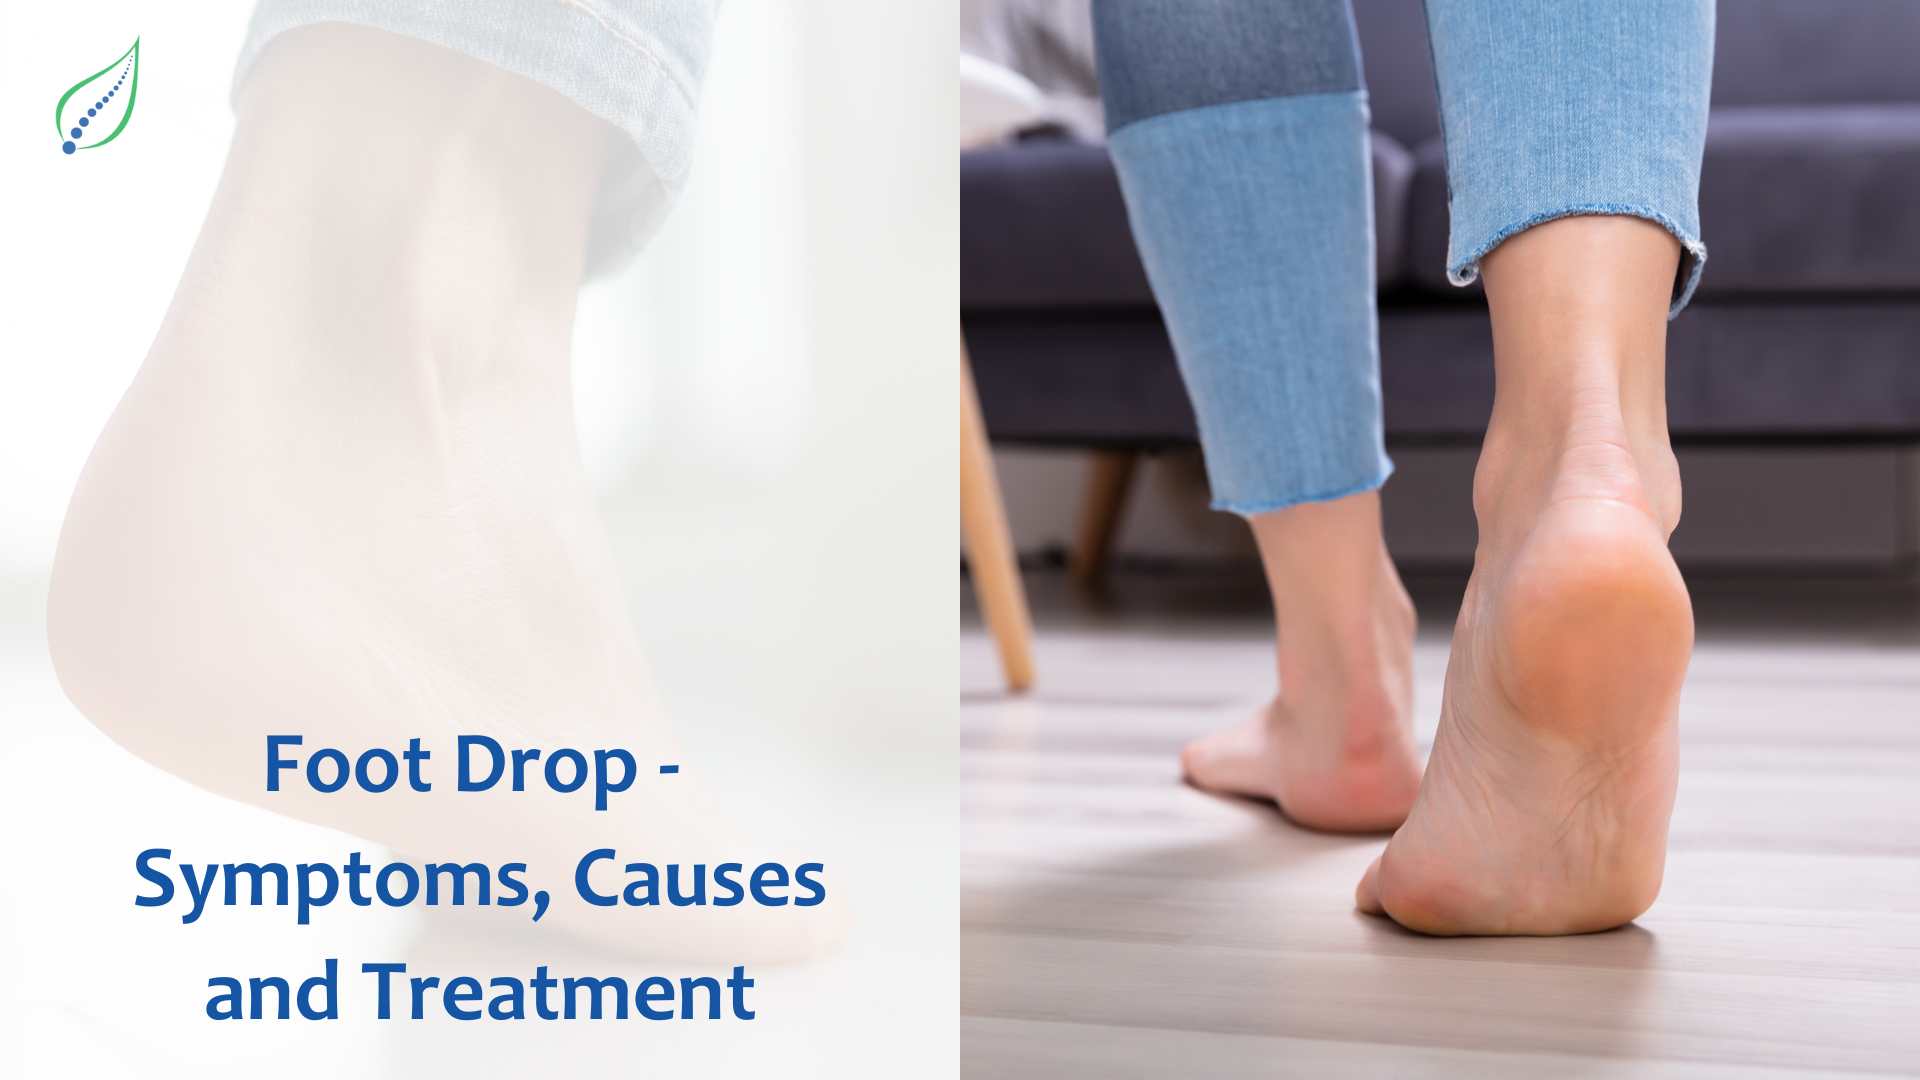 https://www.spinalogy.com/storage/app/uploads/product_img/Foot%20Drop%20-%20%20Symptoms,%20Causes%20and%20Treatment_1701865109.jpg